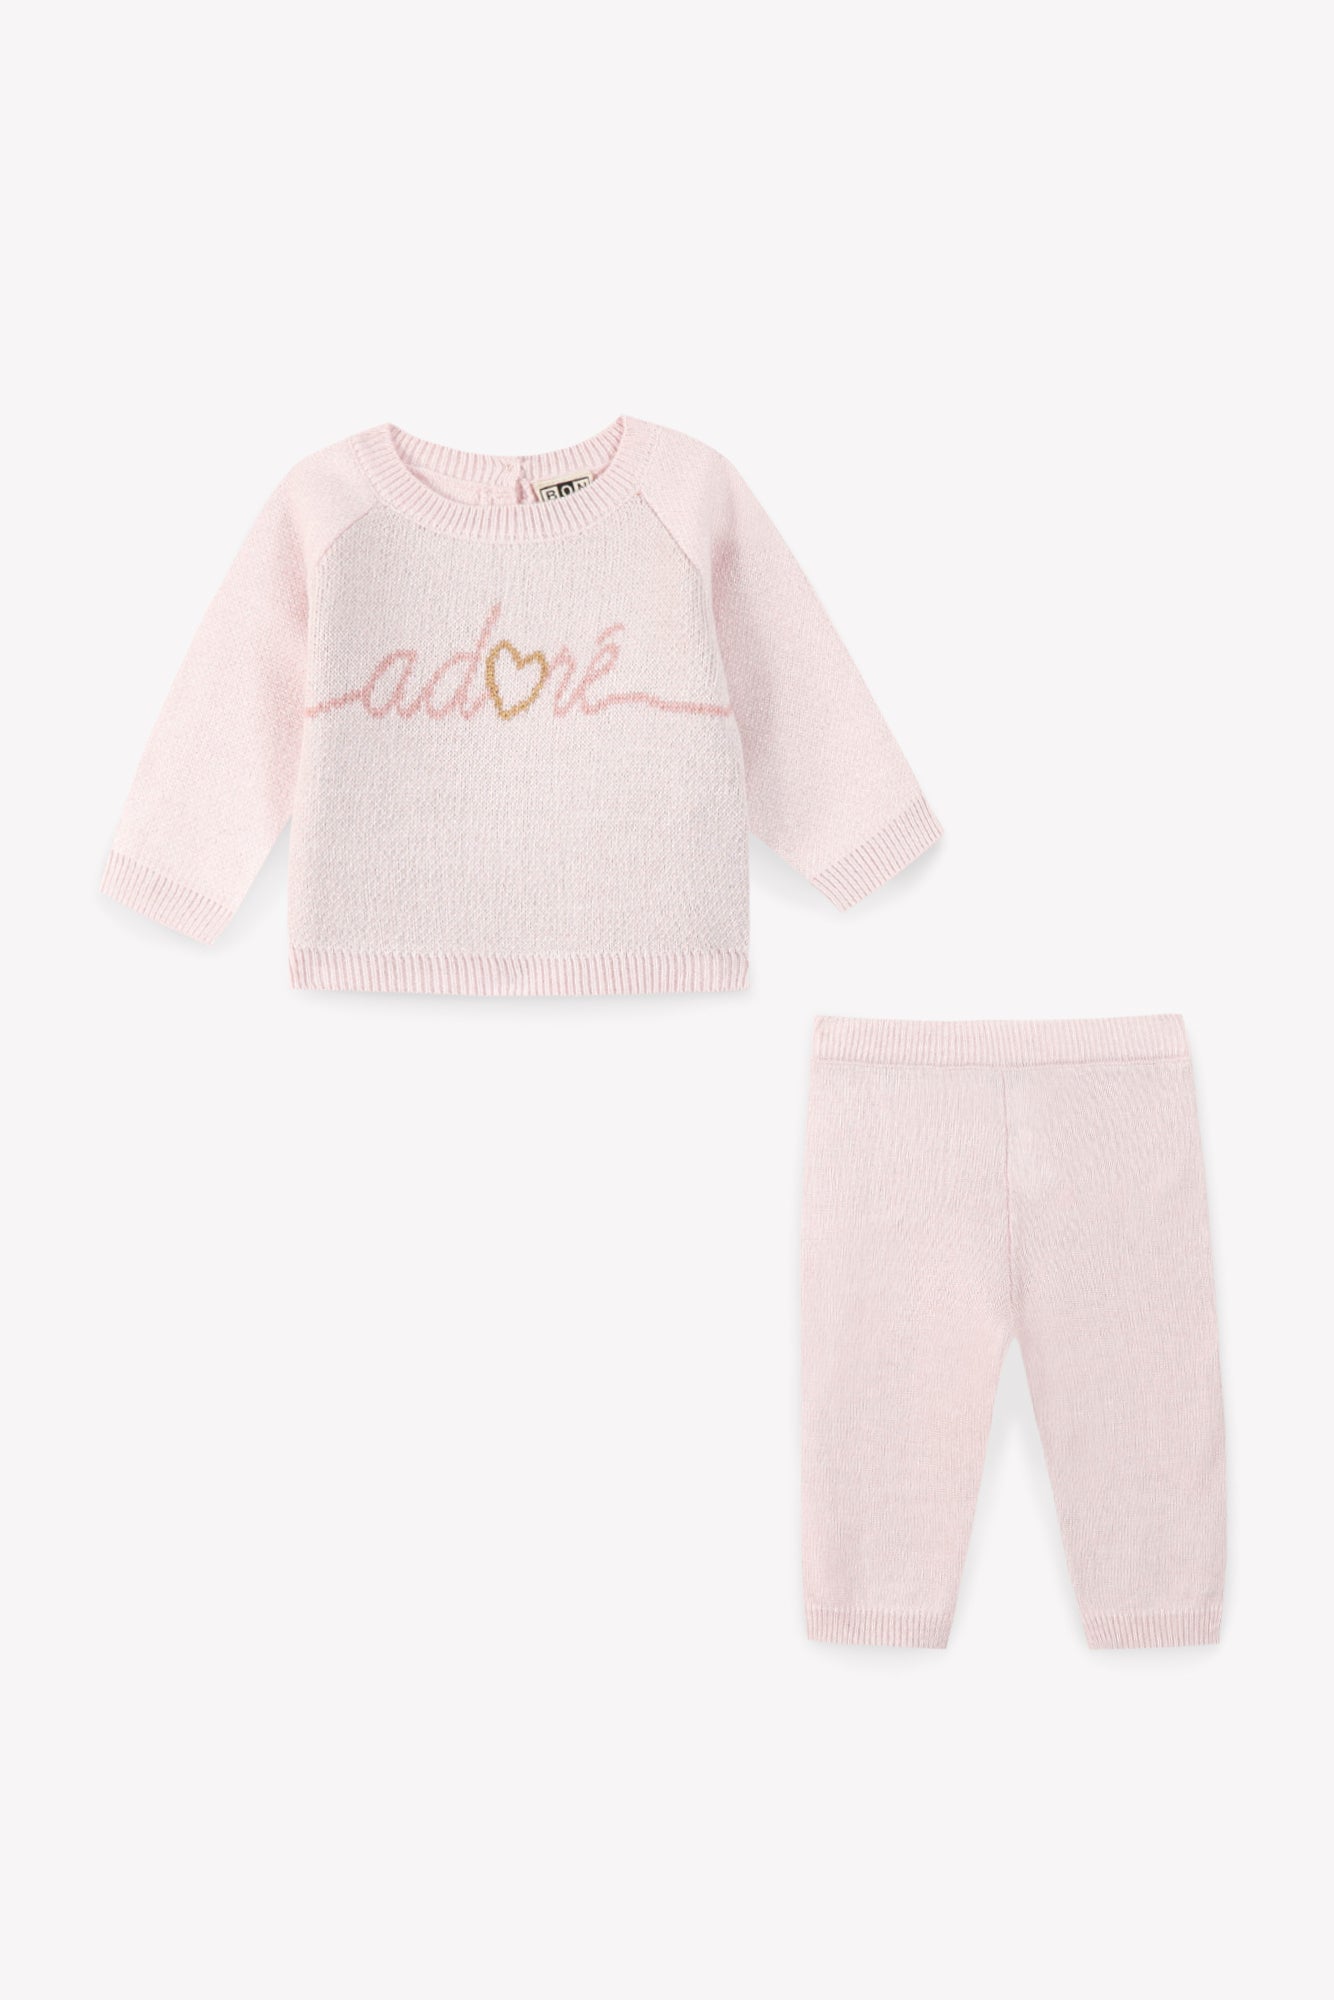 Outfit - Maxence Pink Baby in double jacquard knitting